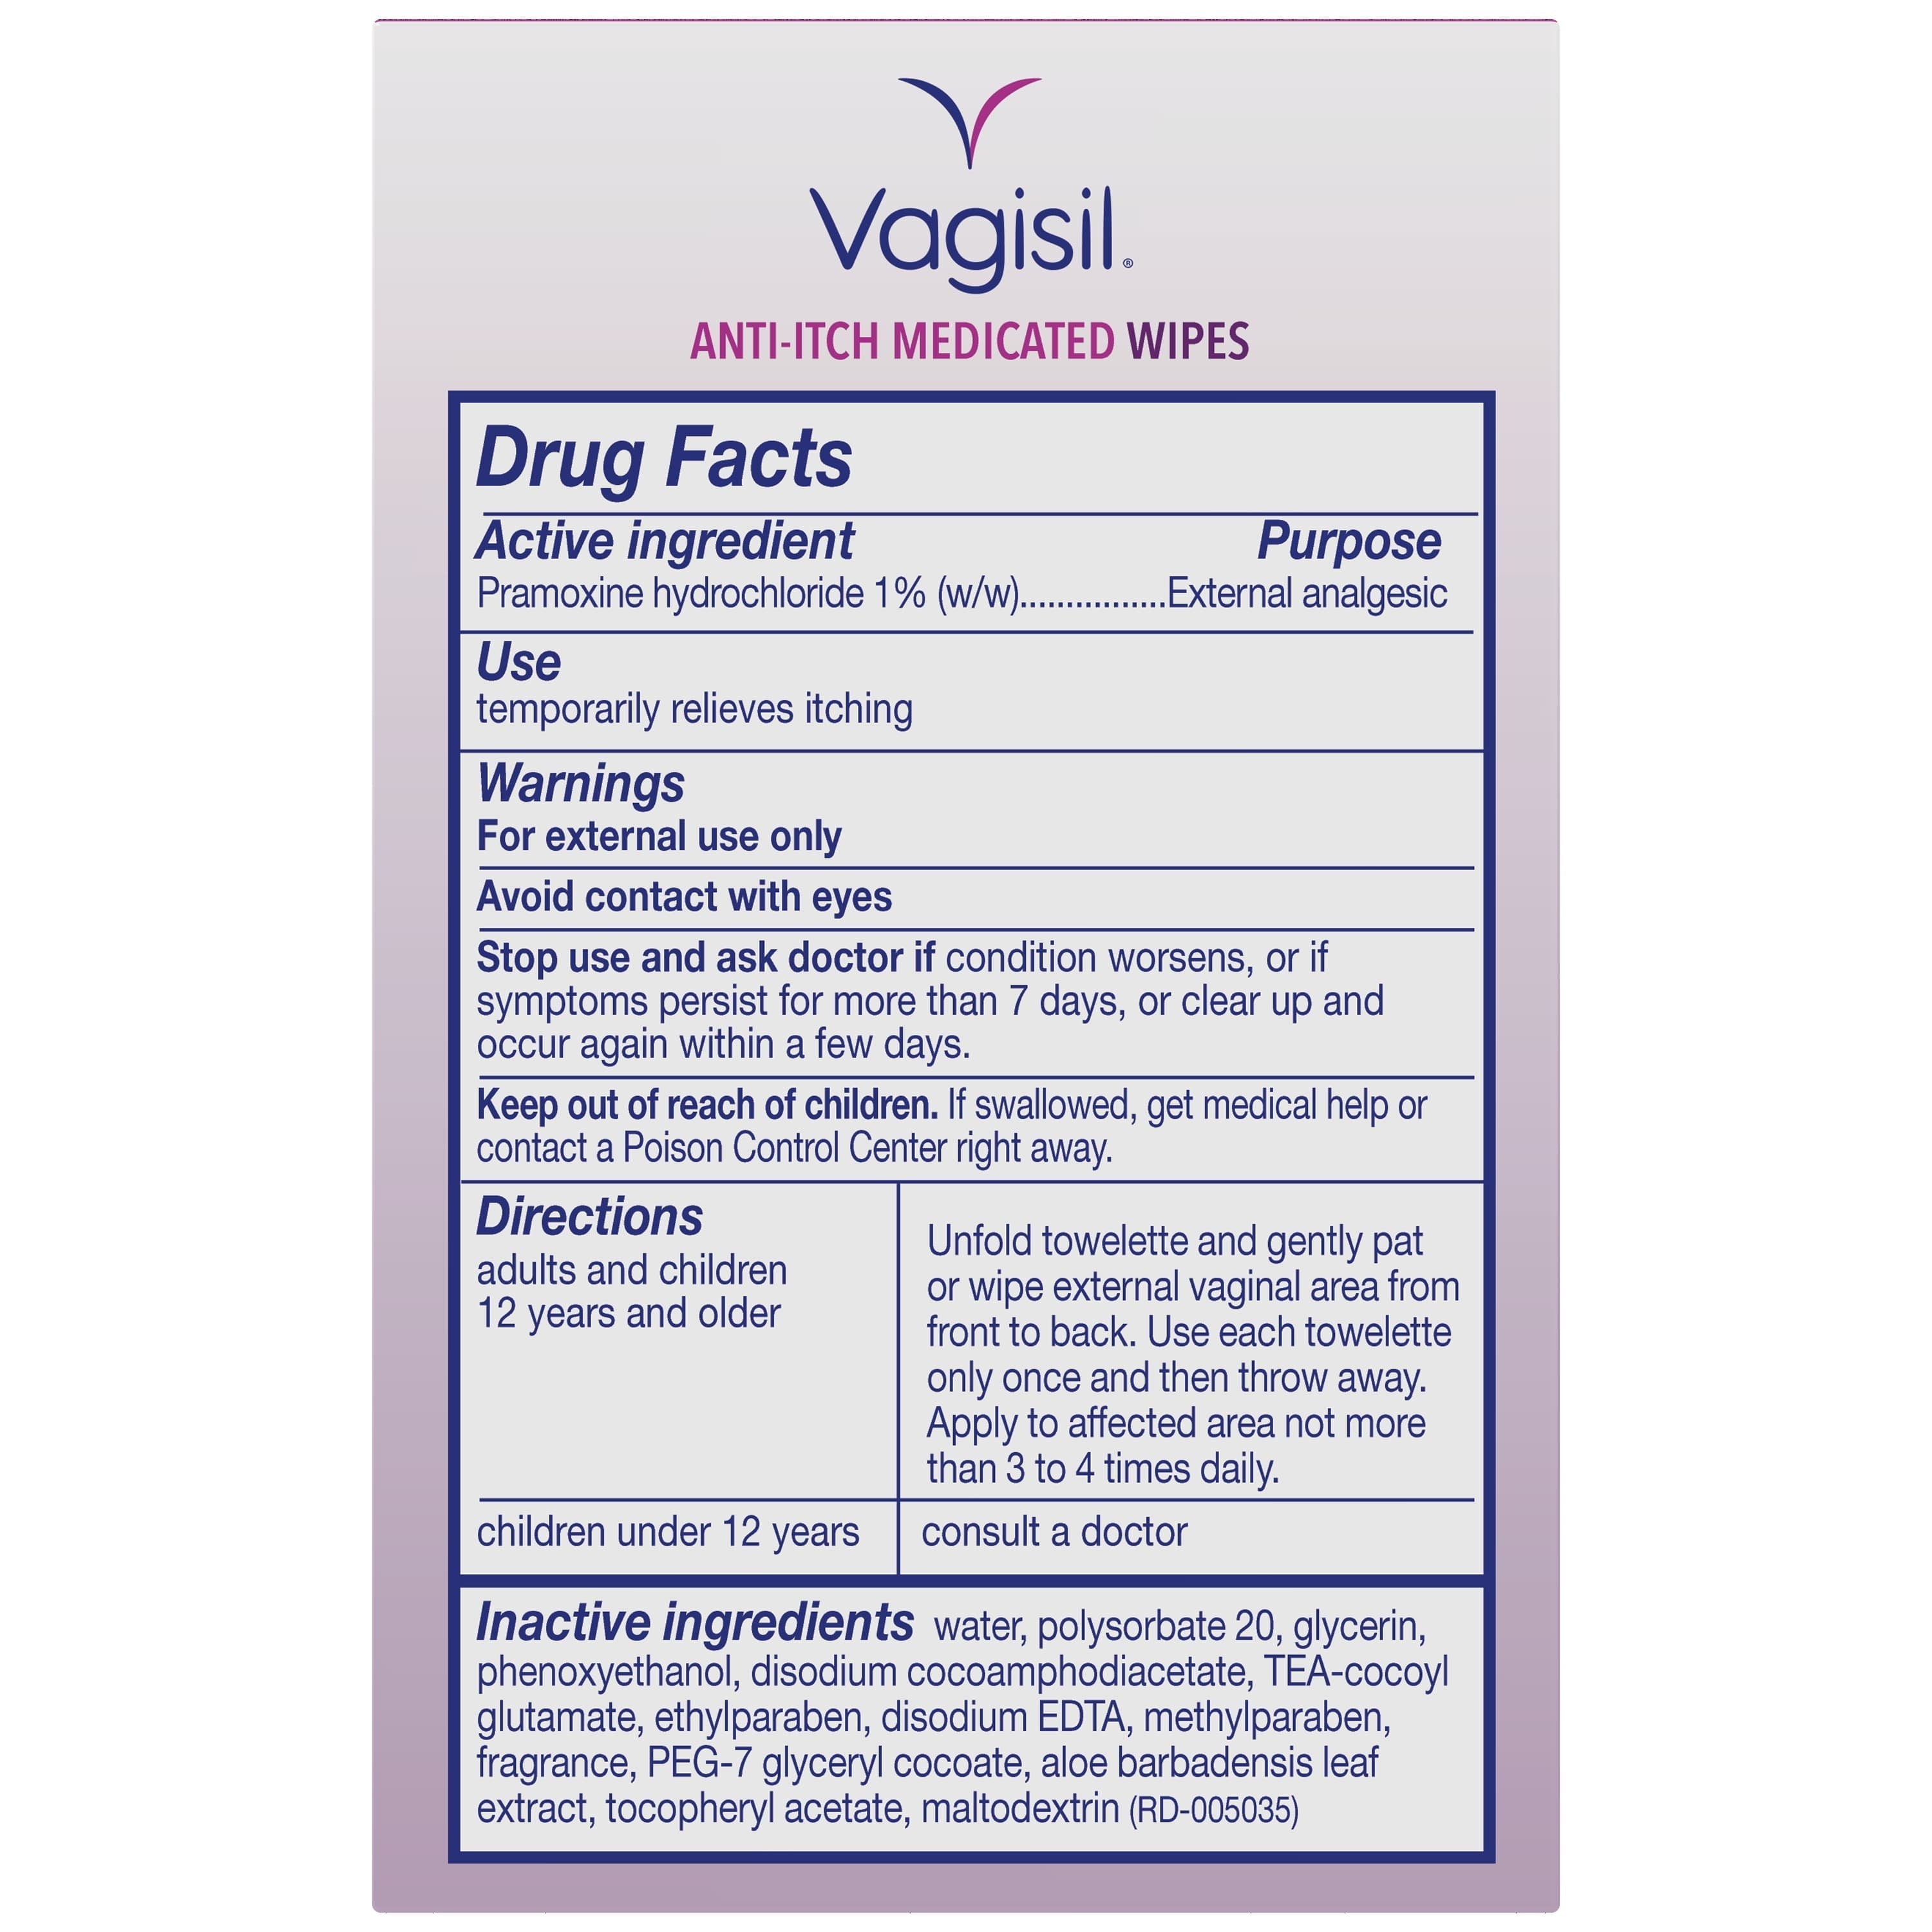 Wholesale prices with free shipping all over United States Vagisil Anti-Itch Medicated Wipes, Maximum Strength For Instant Relief, 12 Count - Steven Deals